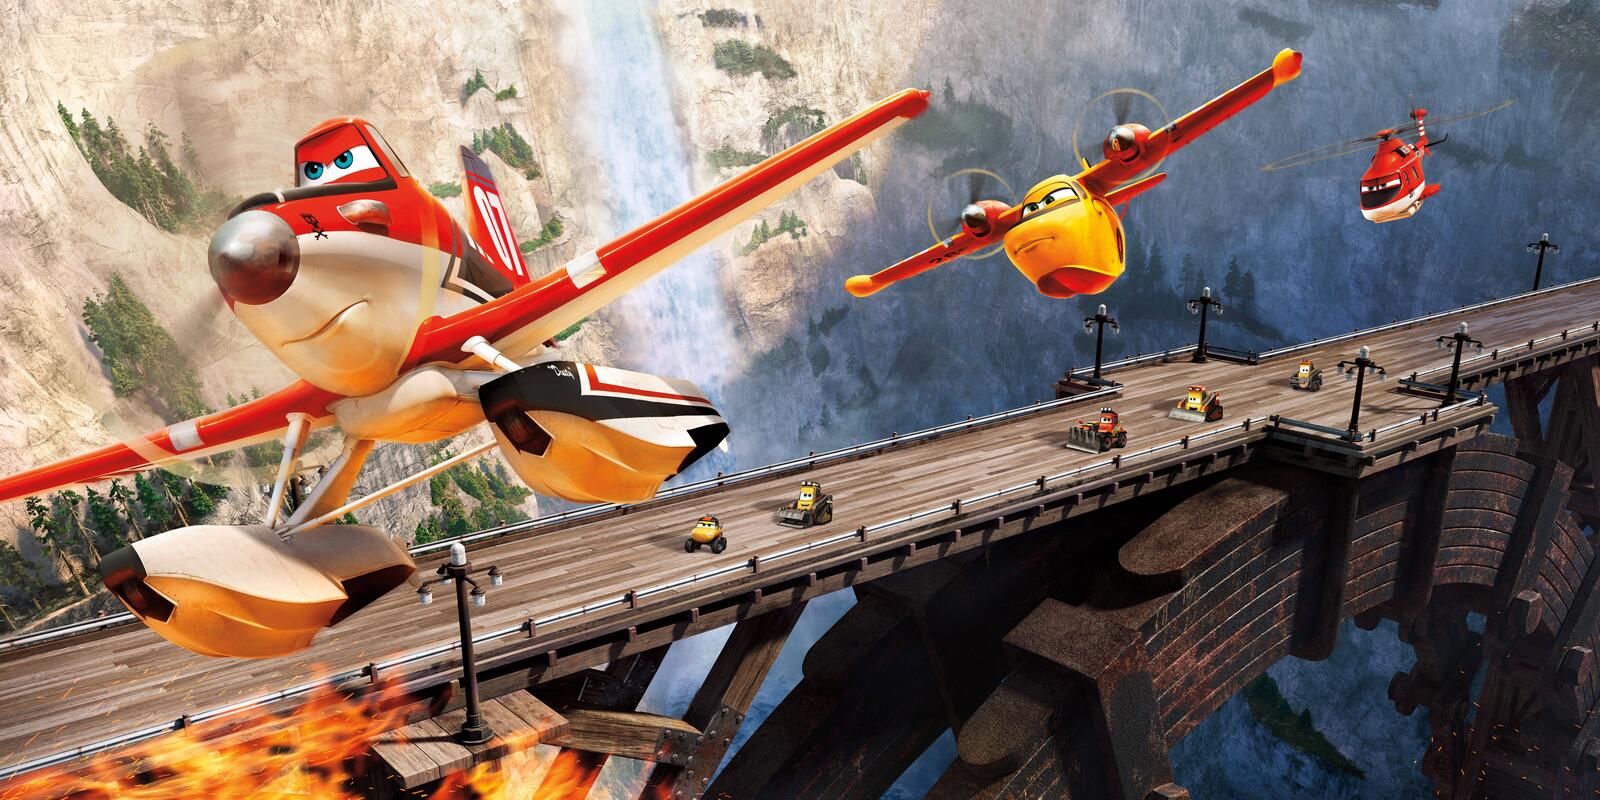 Wallpapers Planes: Fire and water adventure cartoon on the desktop